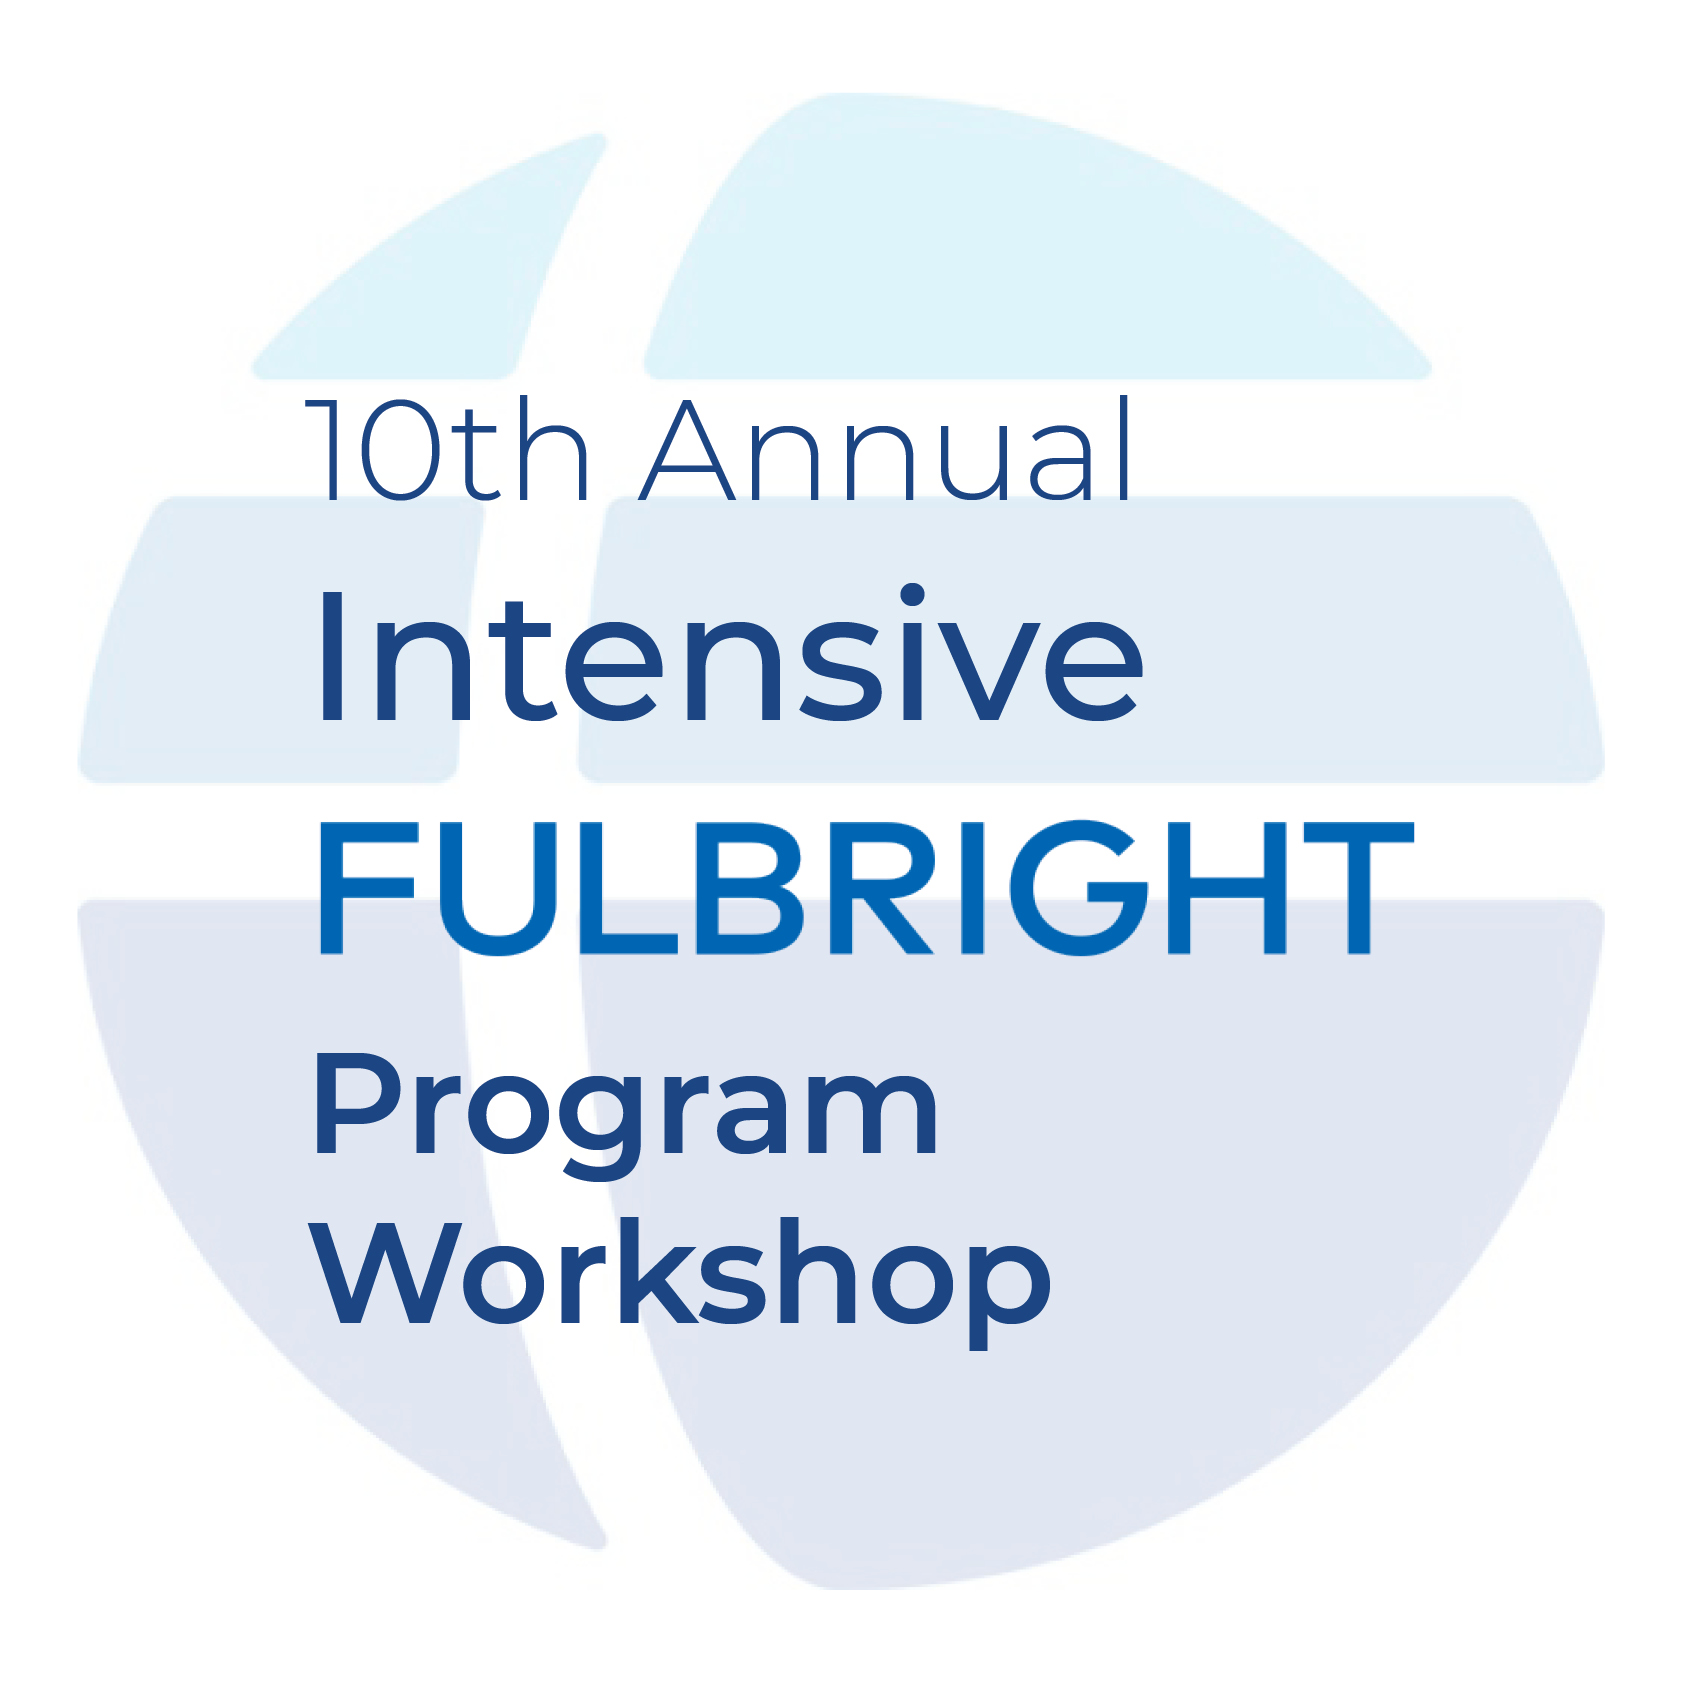 10th Annual Intensive Fulbright Program Workshop promotional image